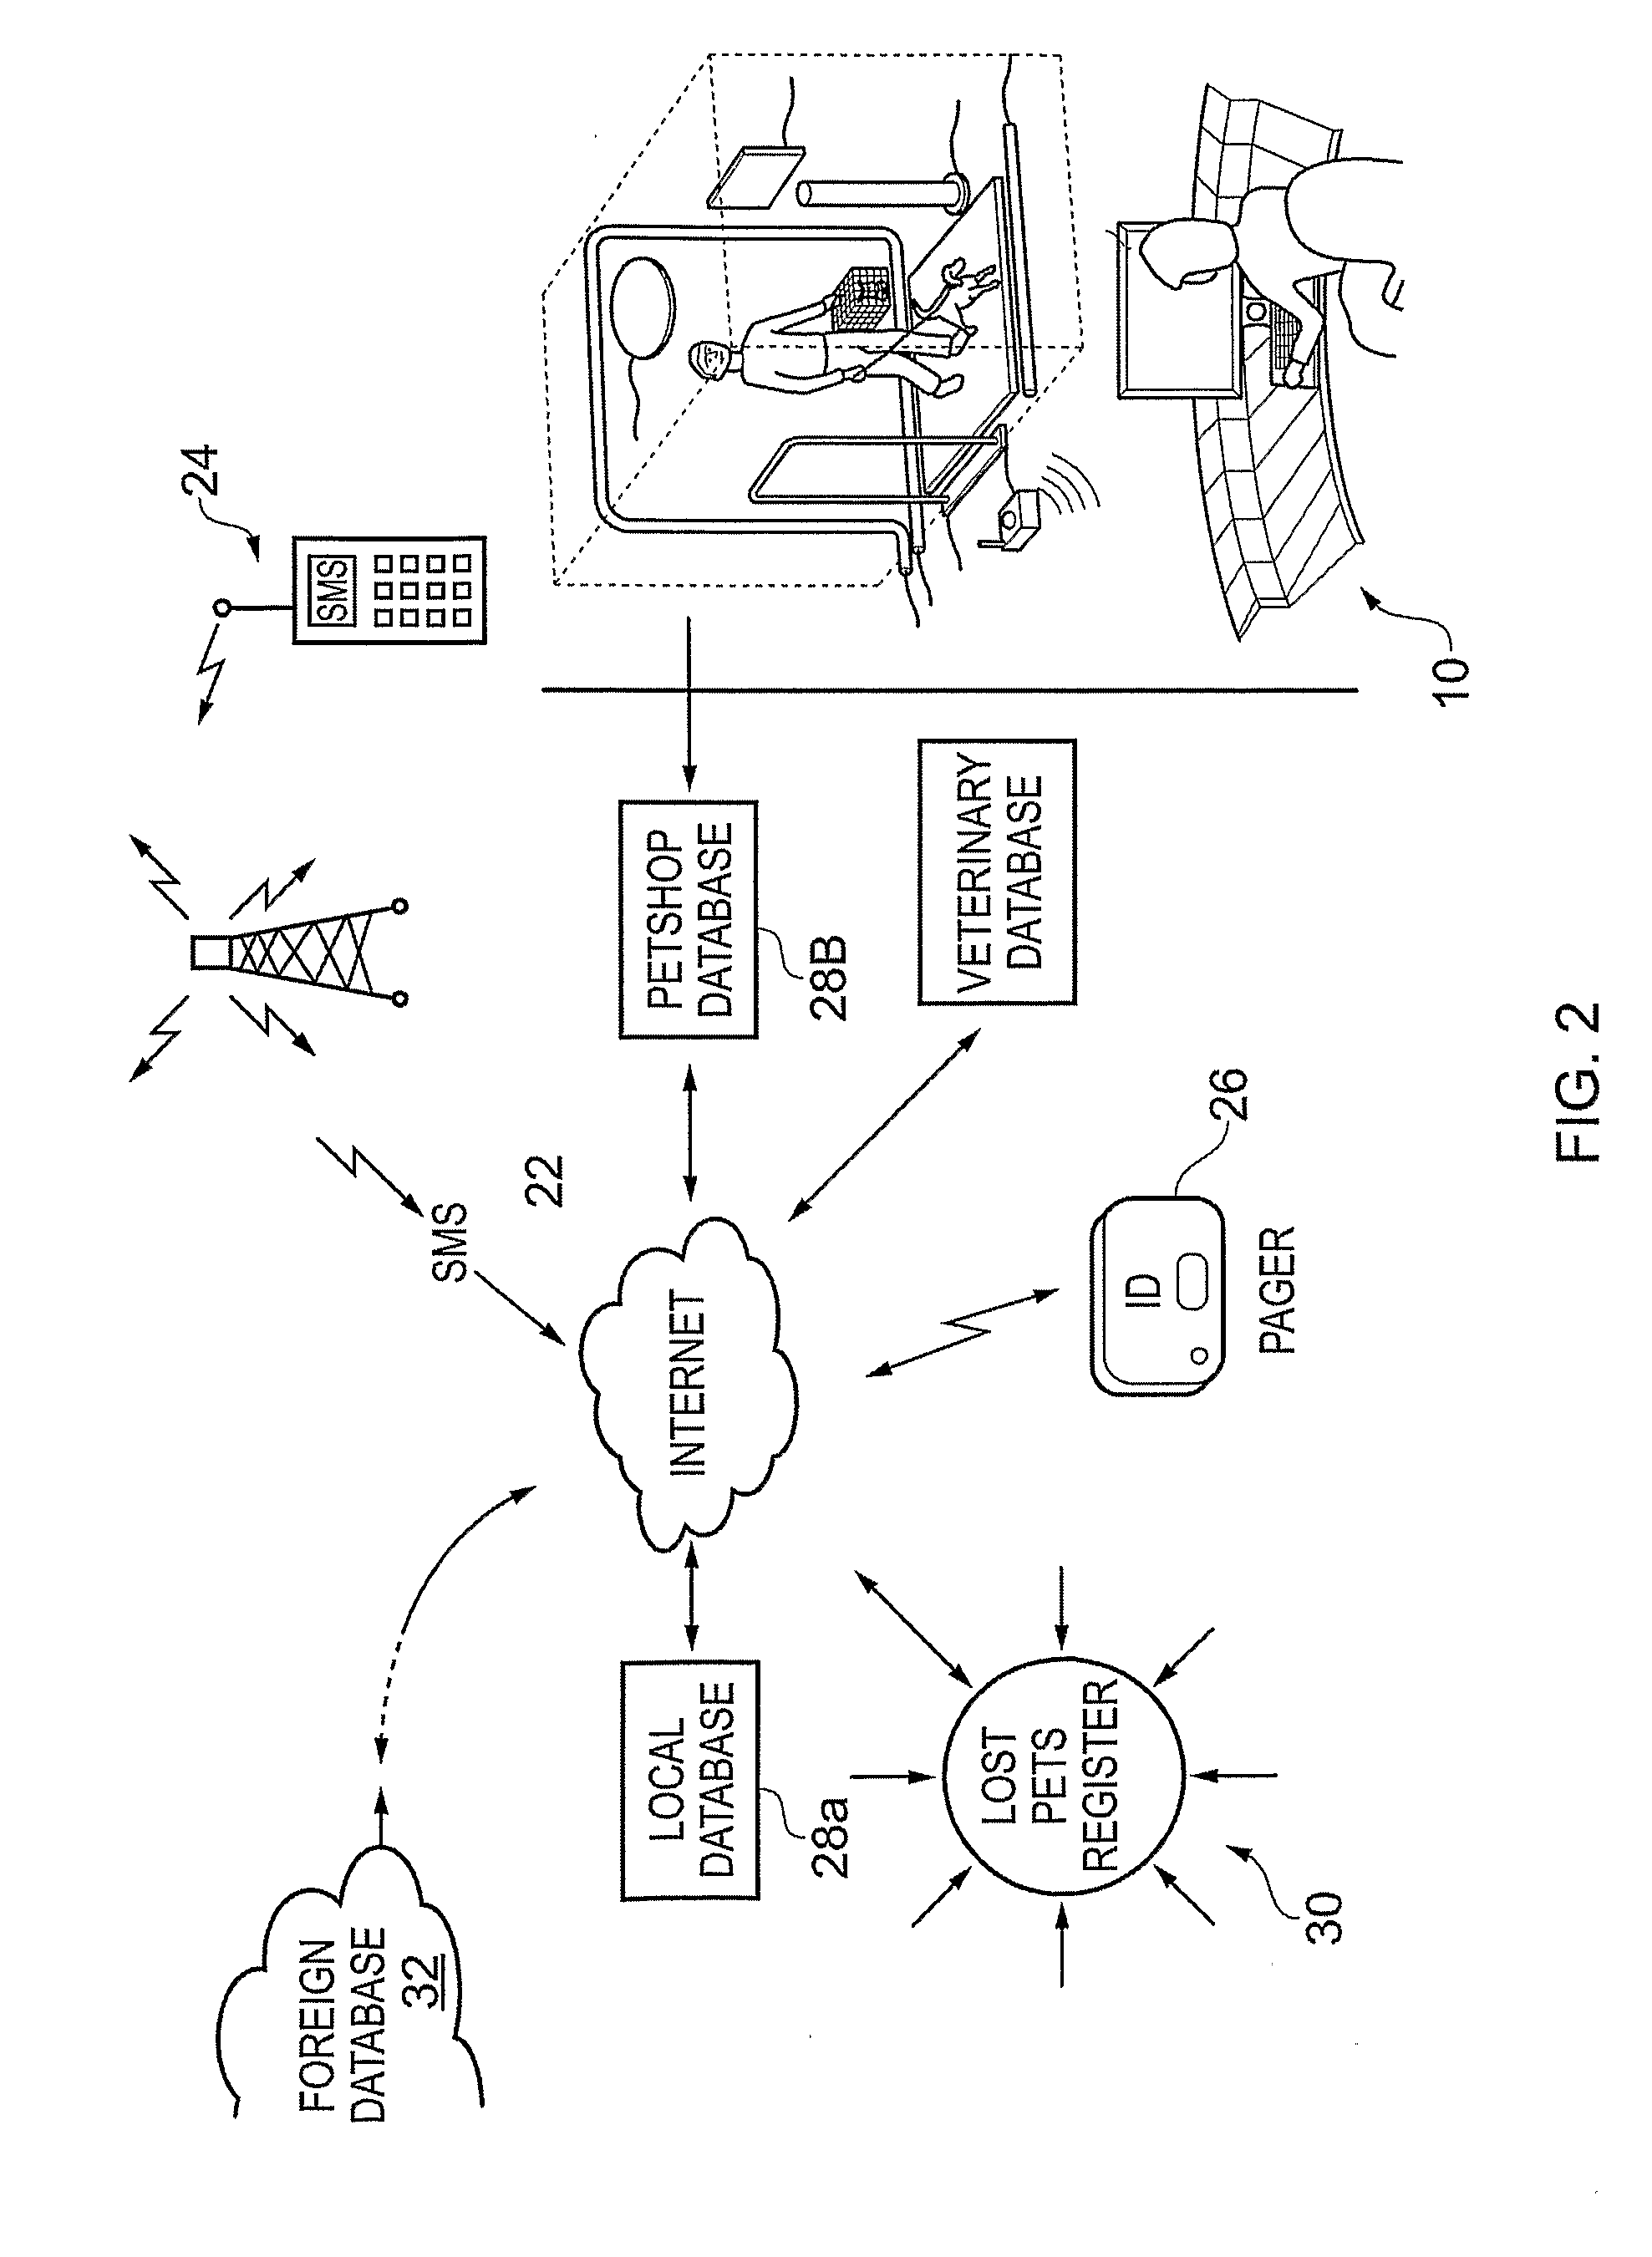 Animal identification system and related method